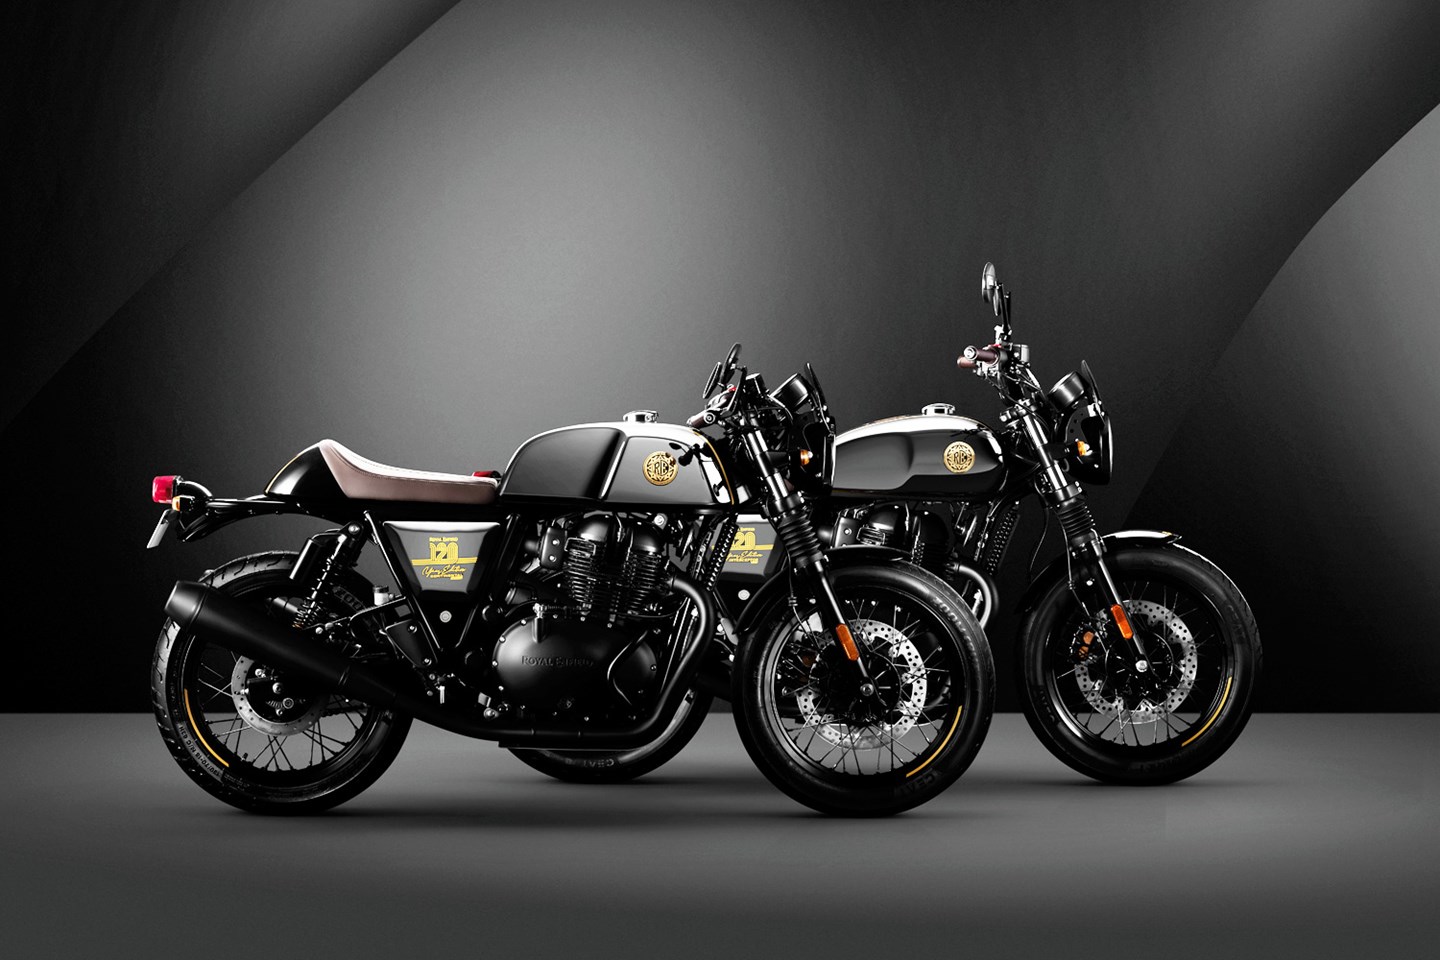 Royal Enfield commemorate 120th anniversary with special editions | MCN